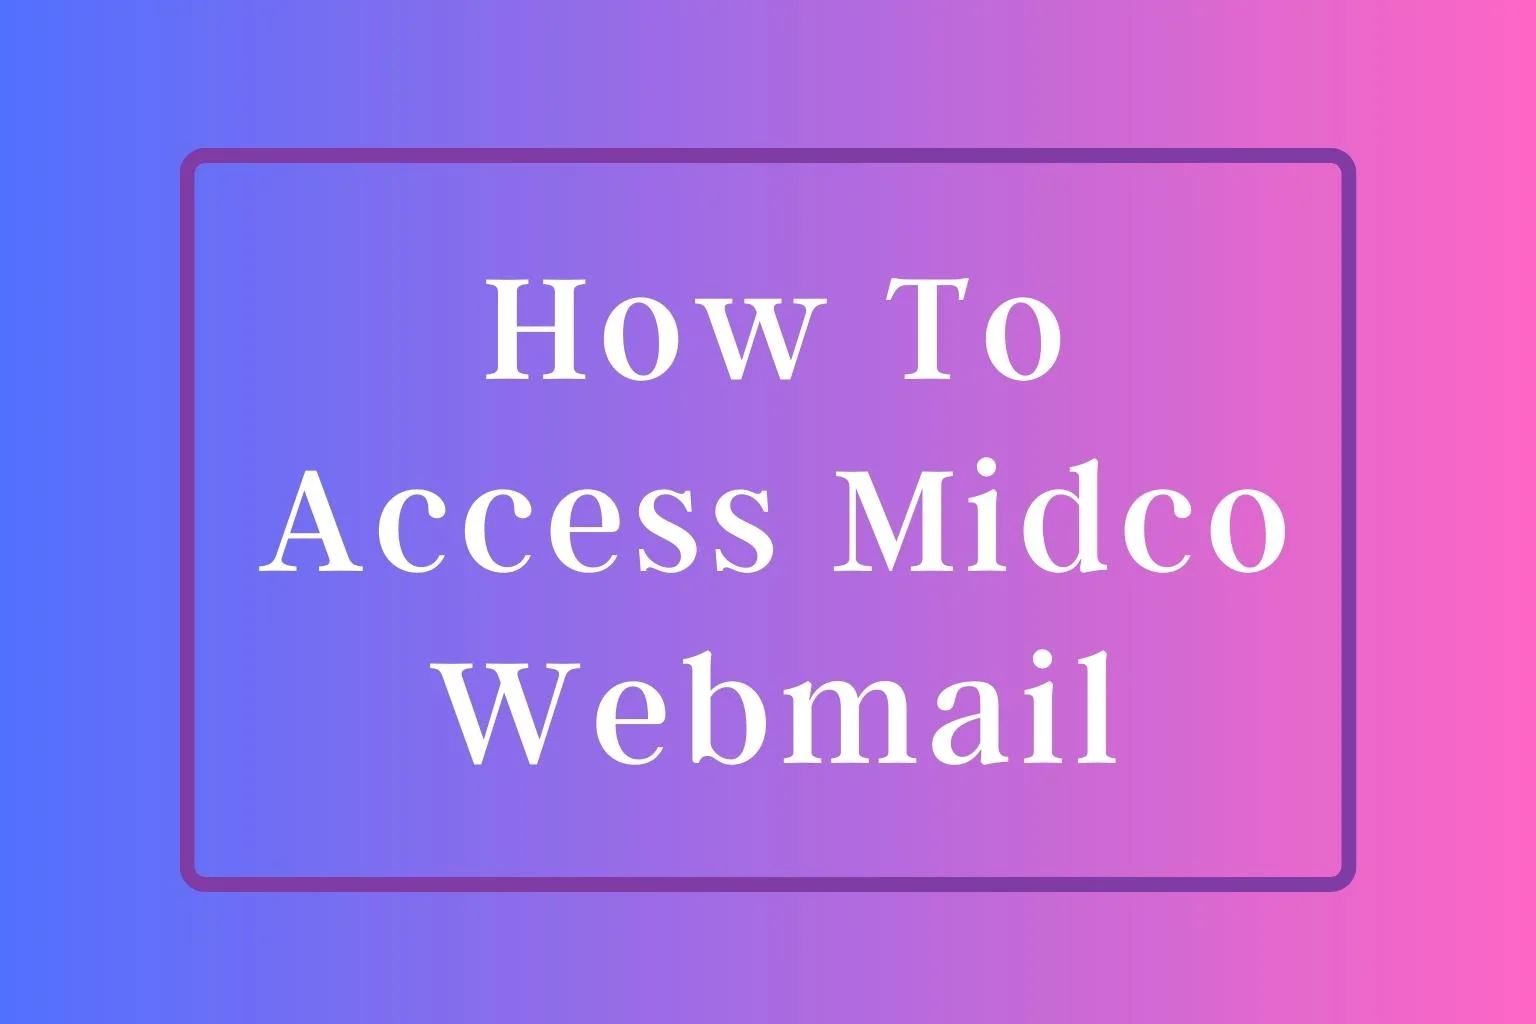 How To Access Midco Webmail